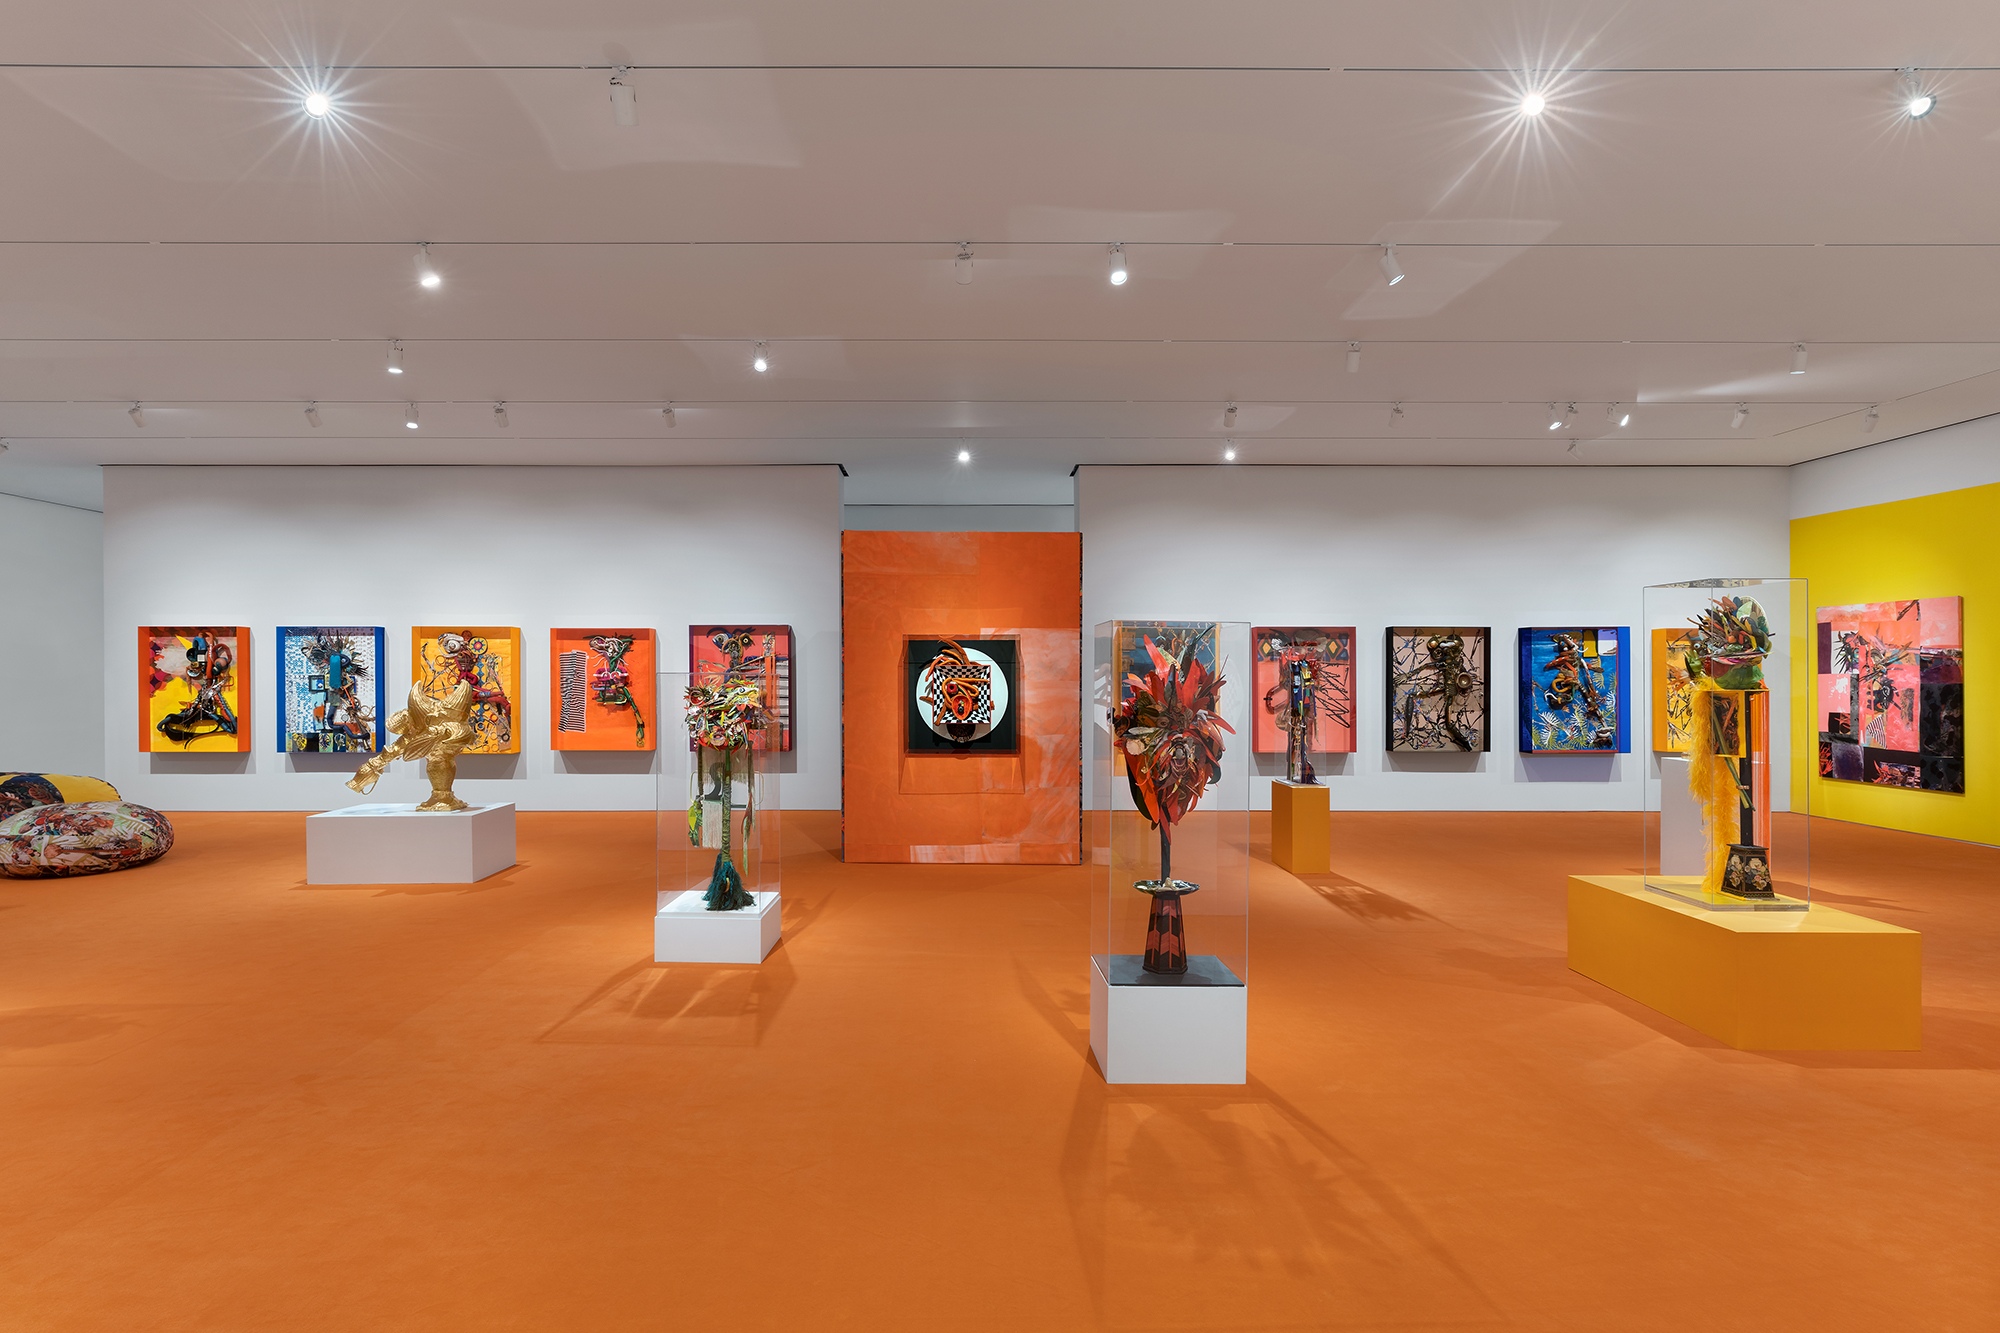 Interior of a museum gallery, showing eleven colorful framed works hung on the walls and five freestanding sculptural pieces on the orange-colored floor.